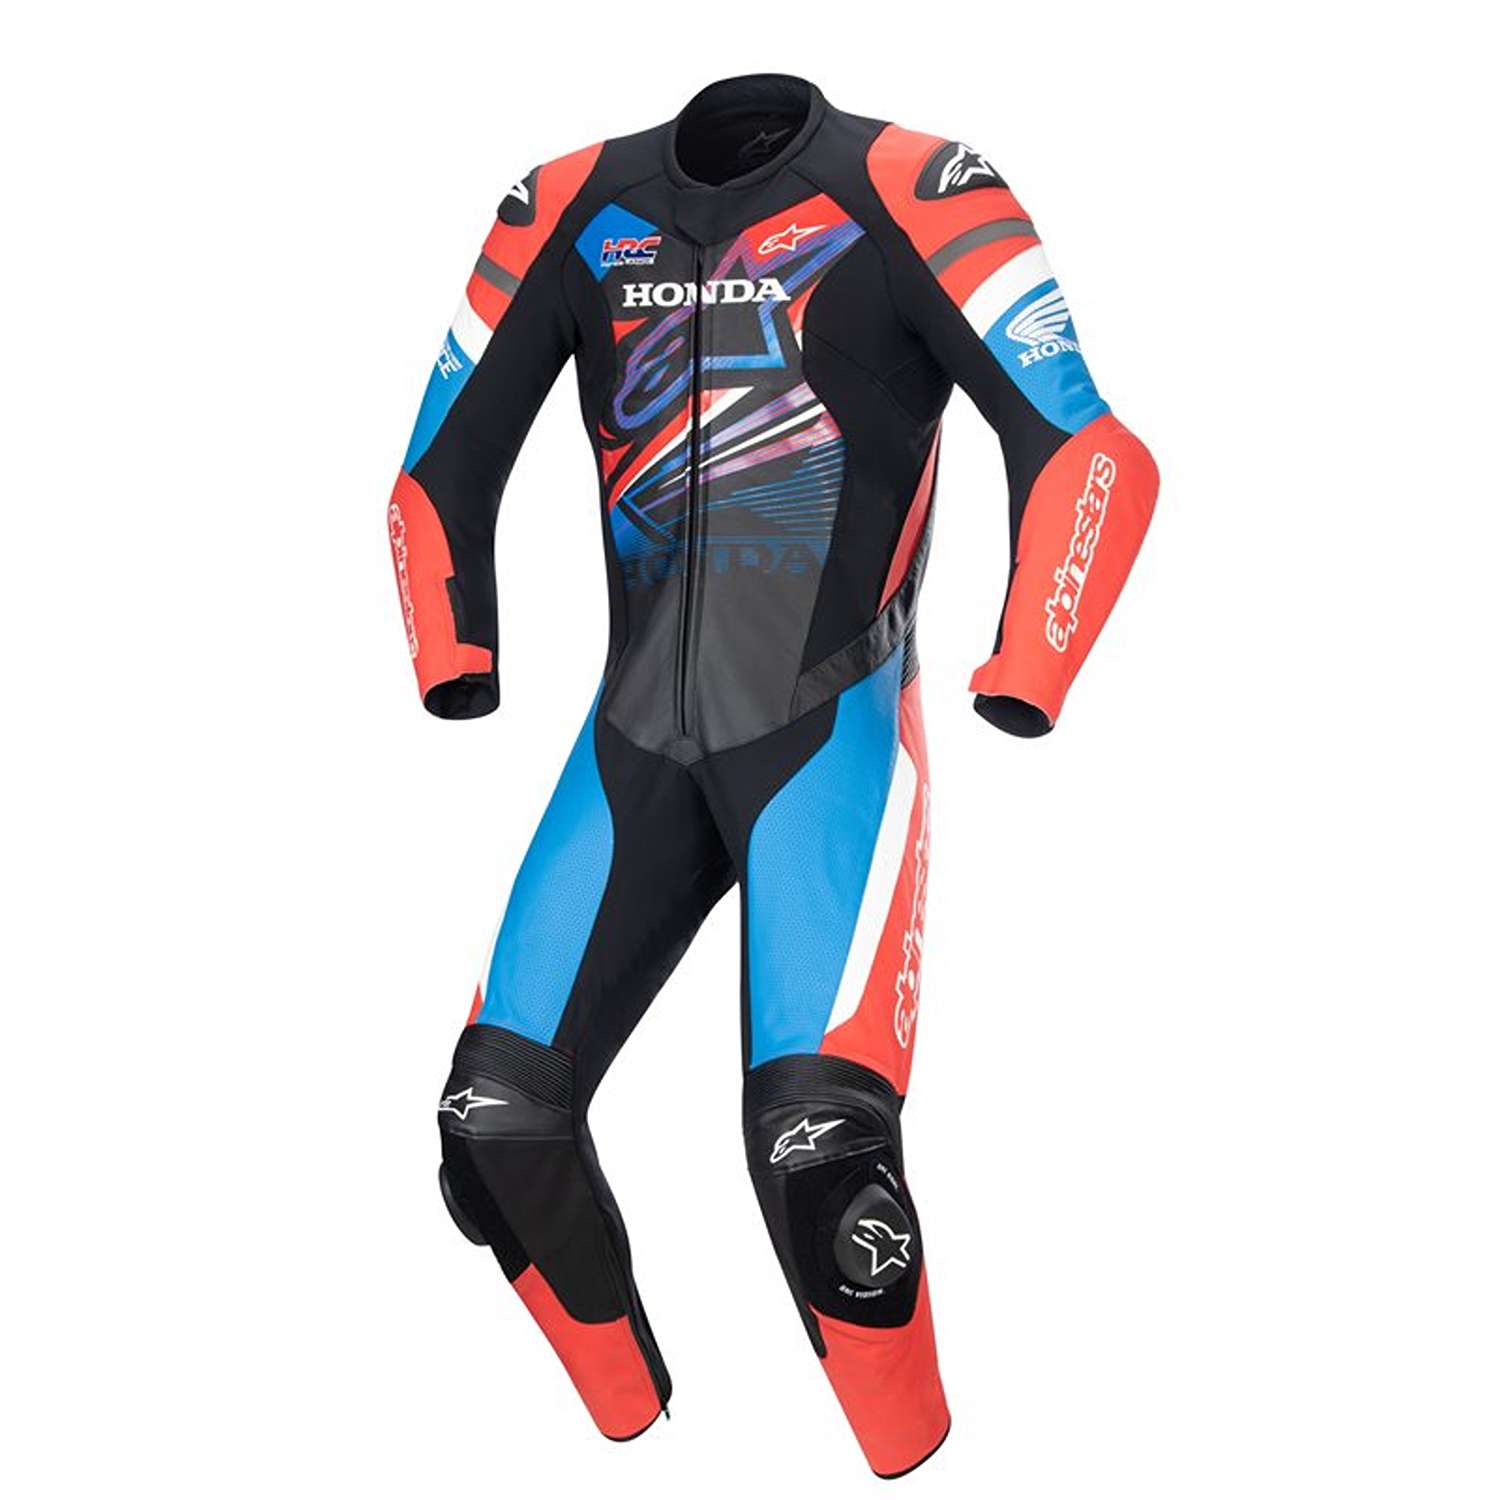 Image of Alpinestars Honda Gp Force Leather Suit Black Bright Red Blue Taille 50